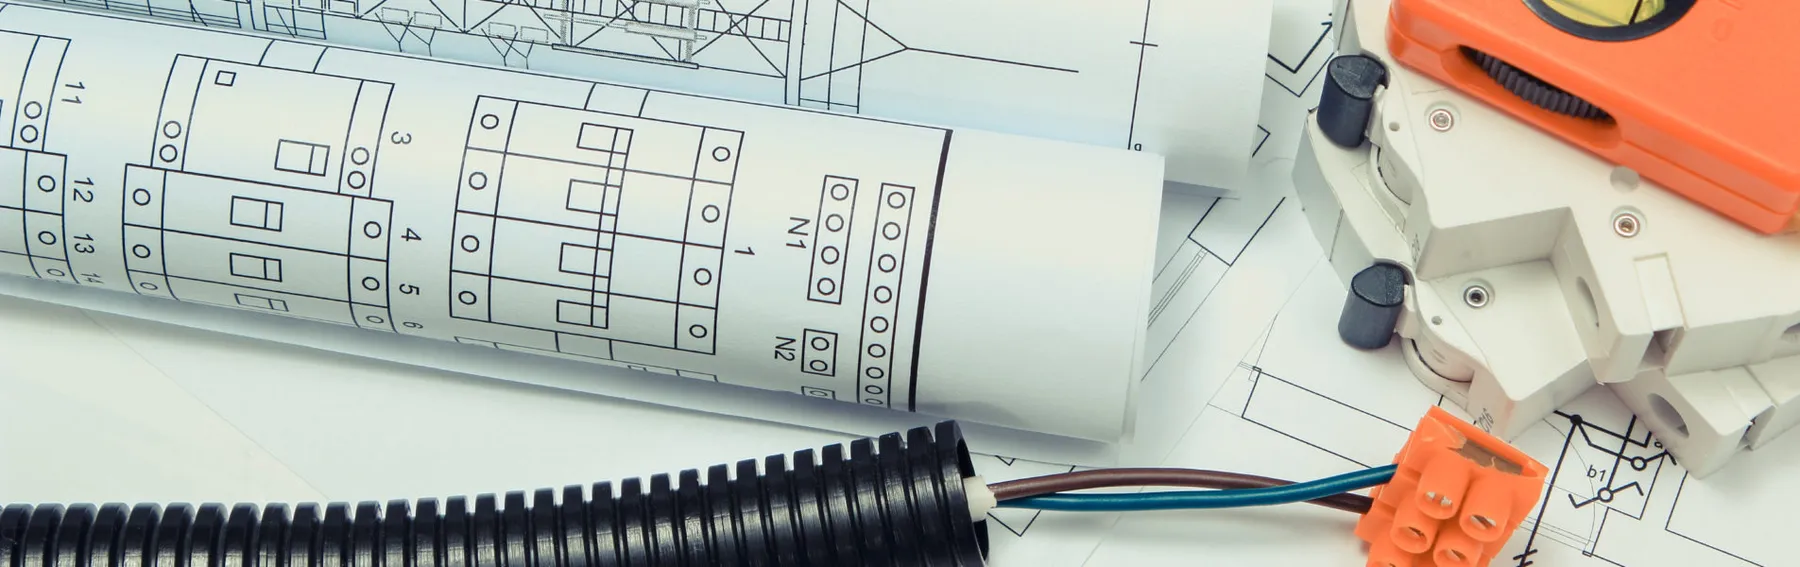 Home building plans with electrical components on the paper